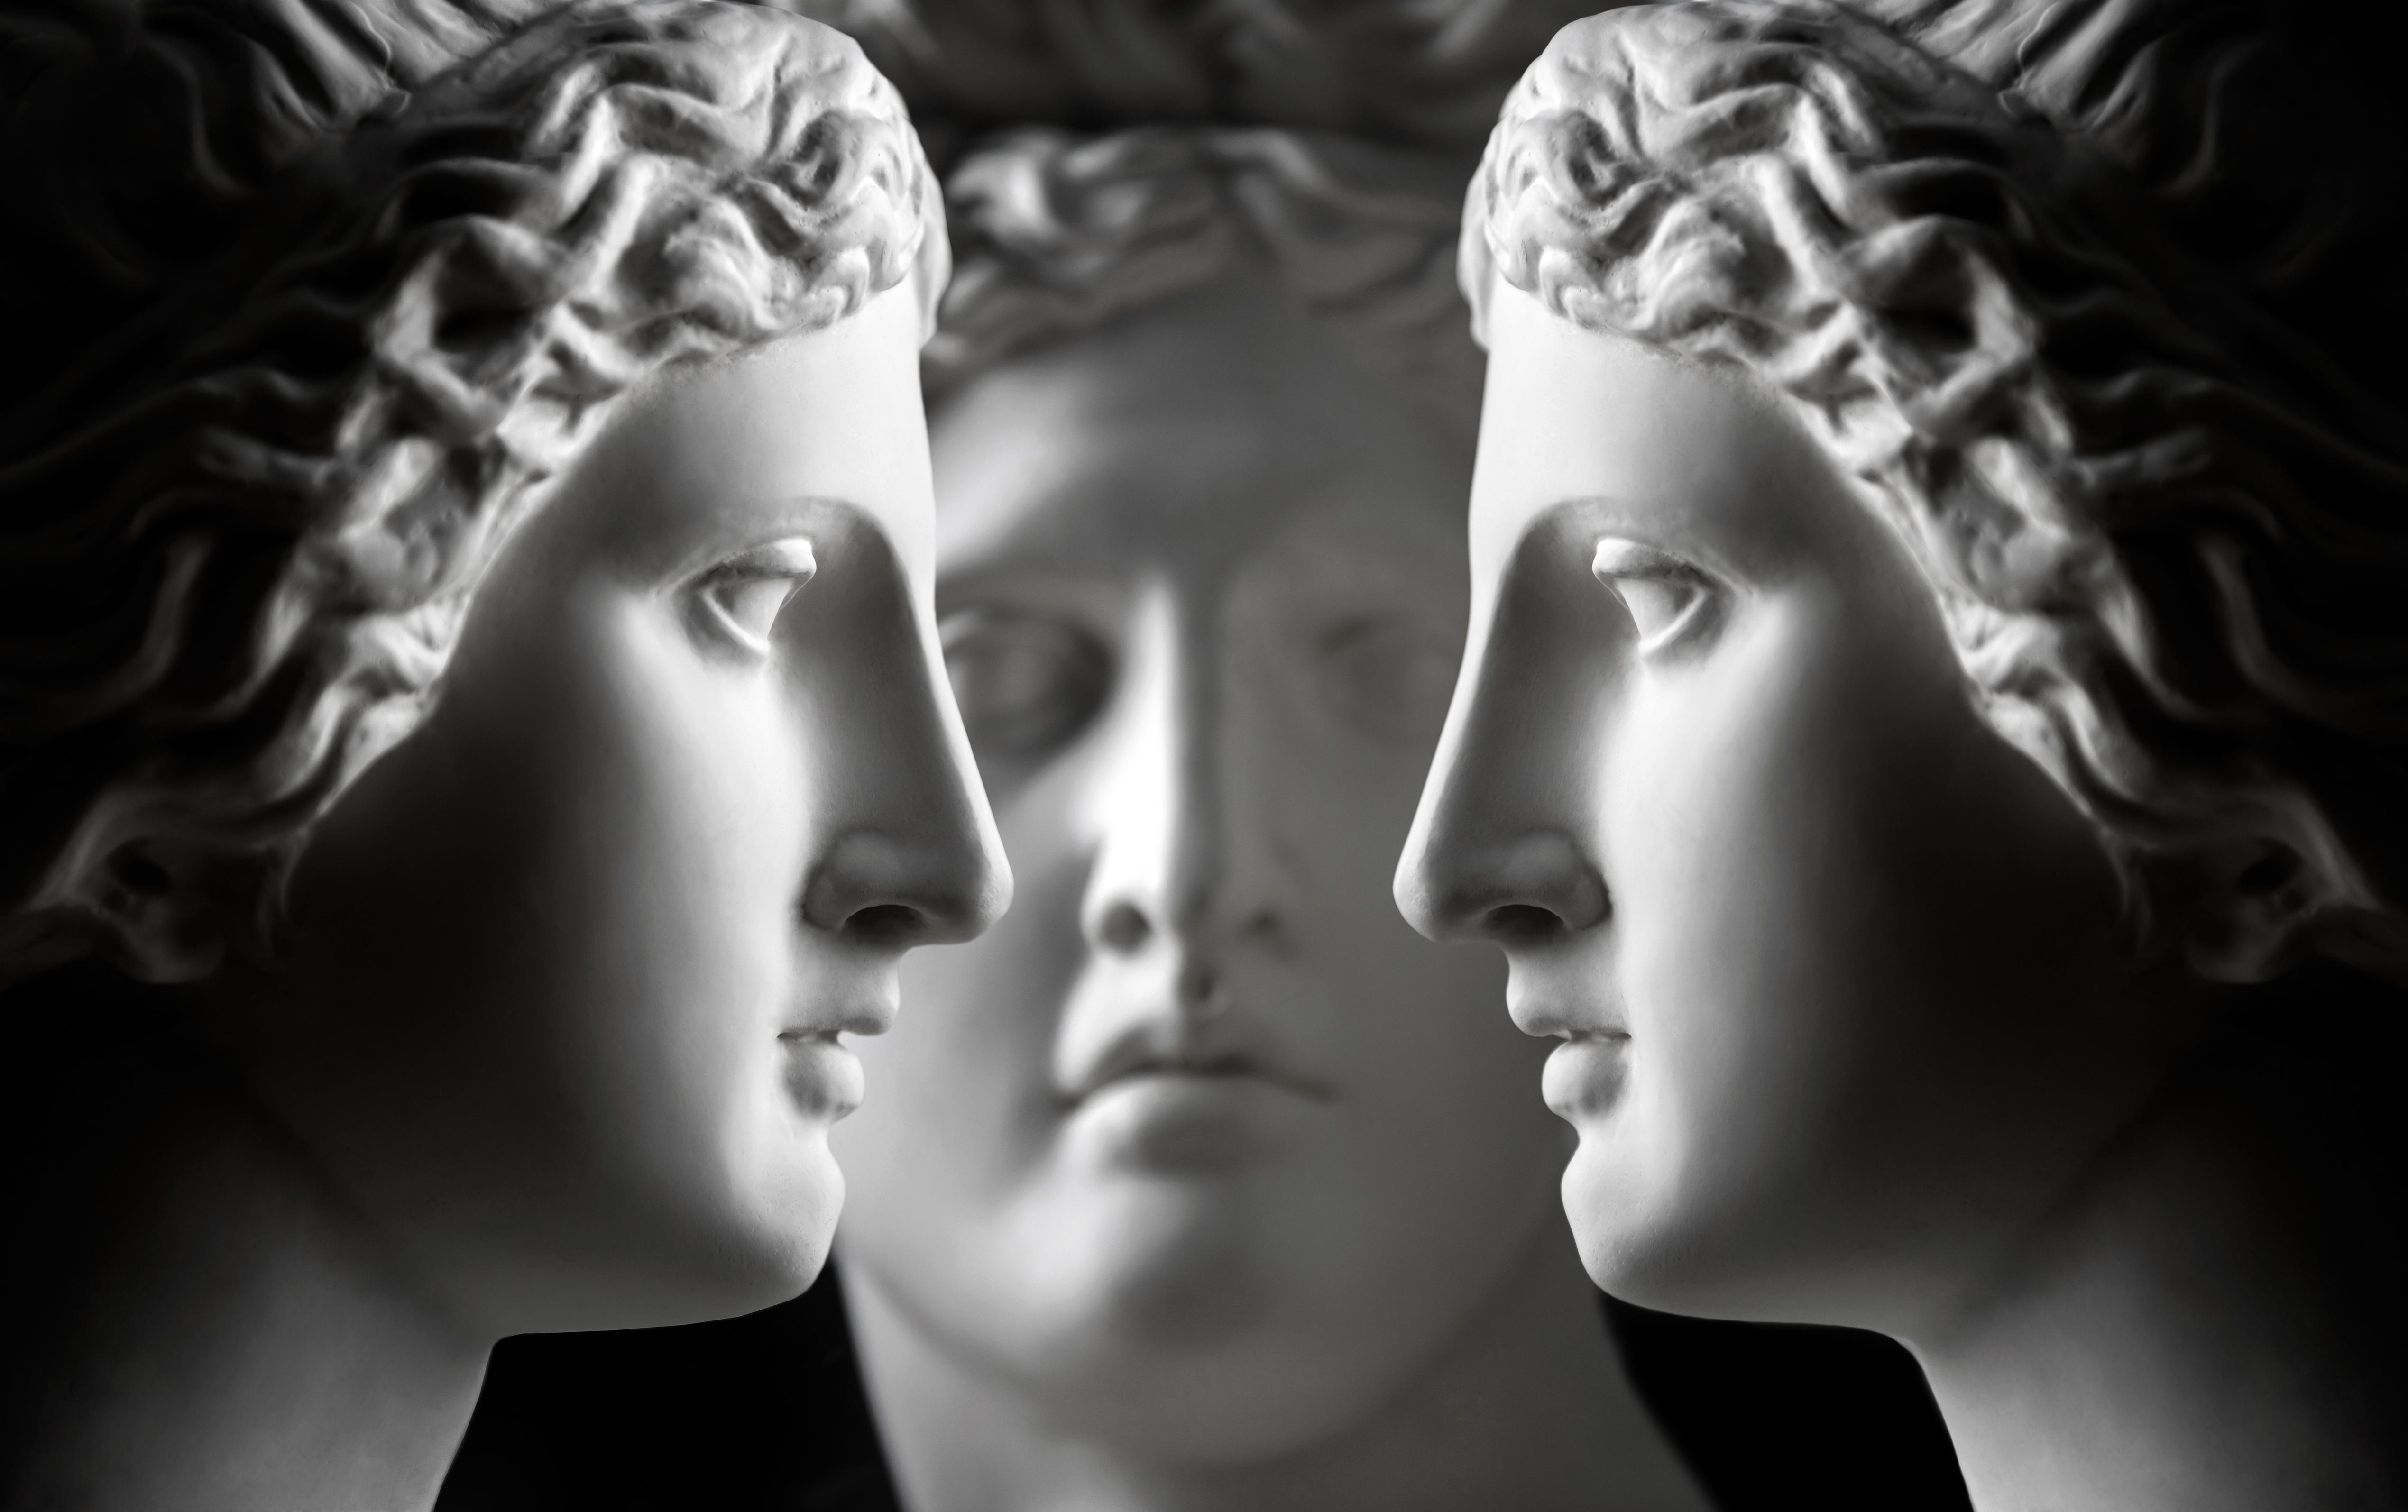 Three marble statue heads (two of Aphrodite and one of Apollo) face each other